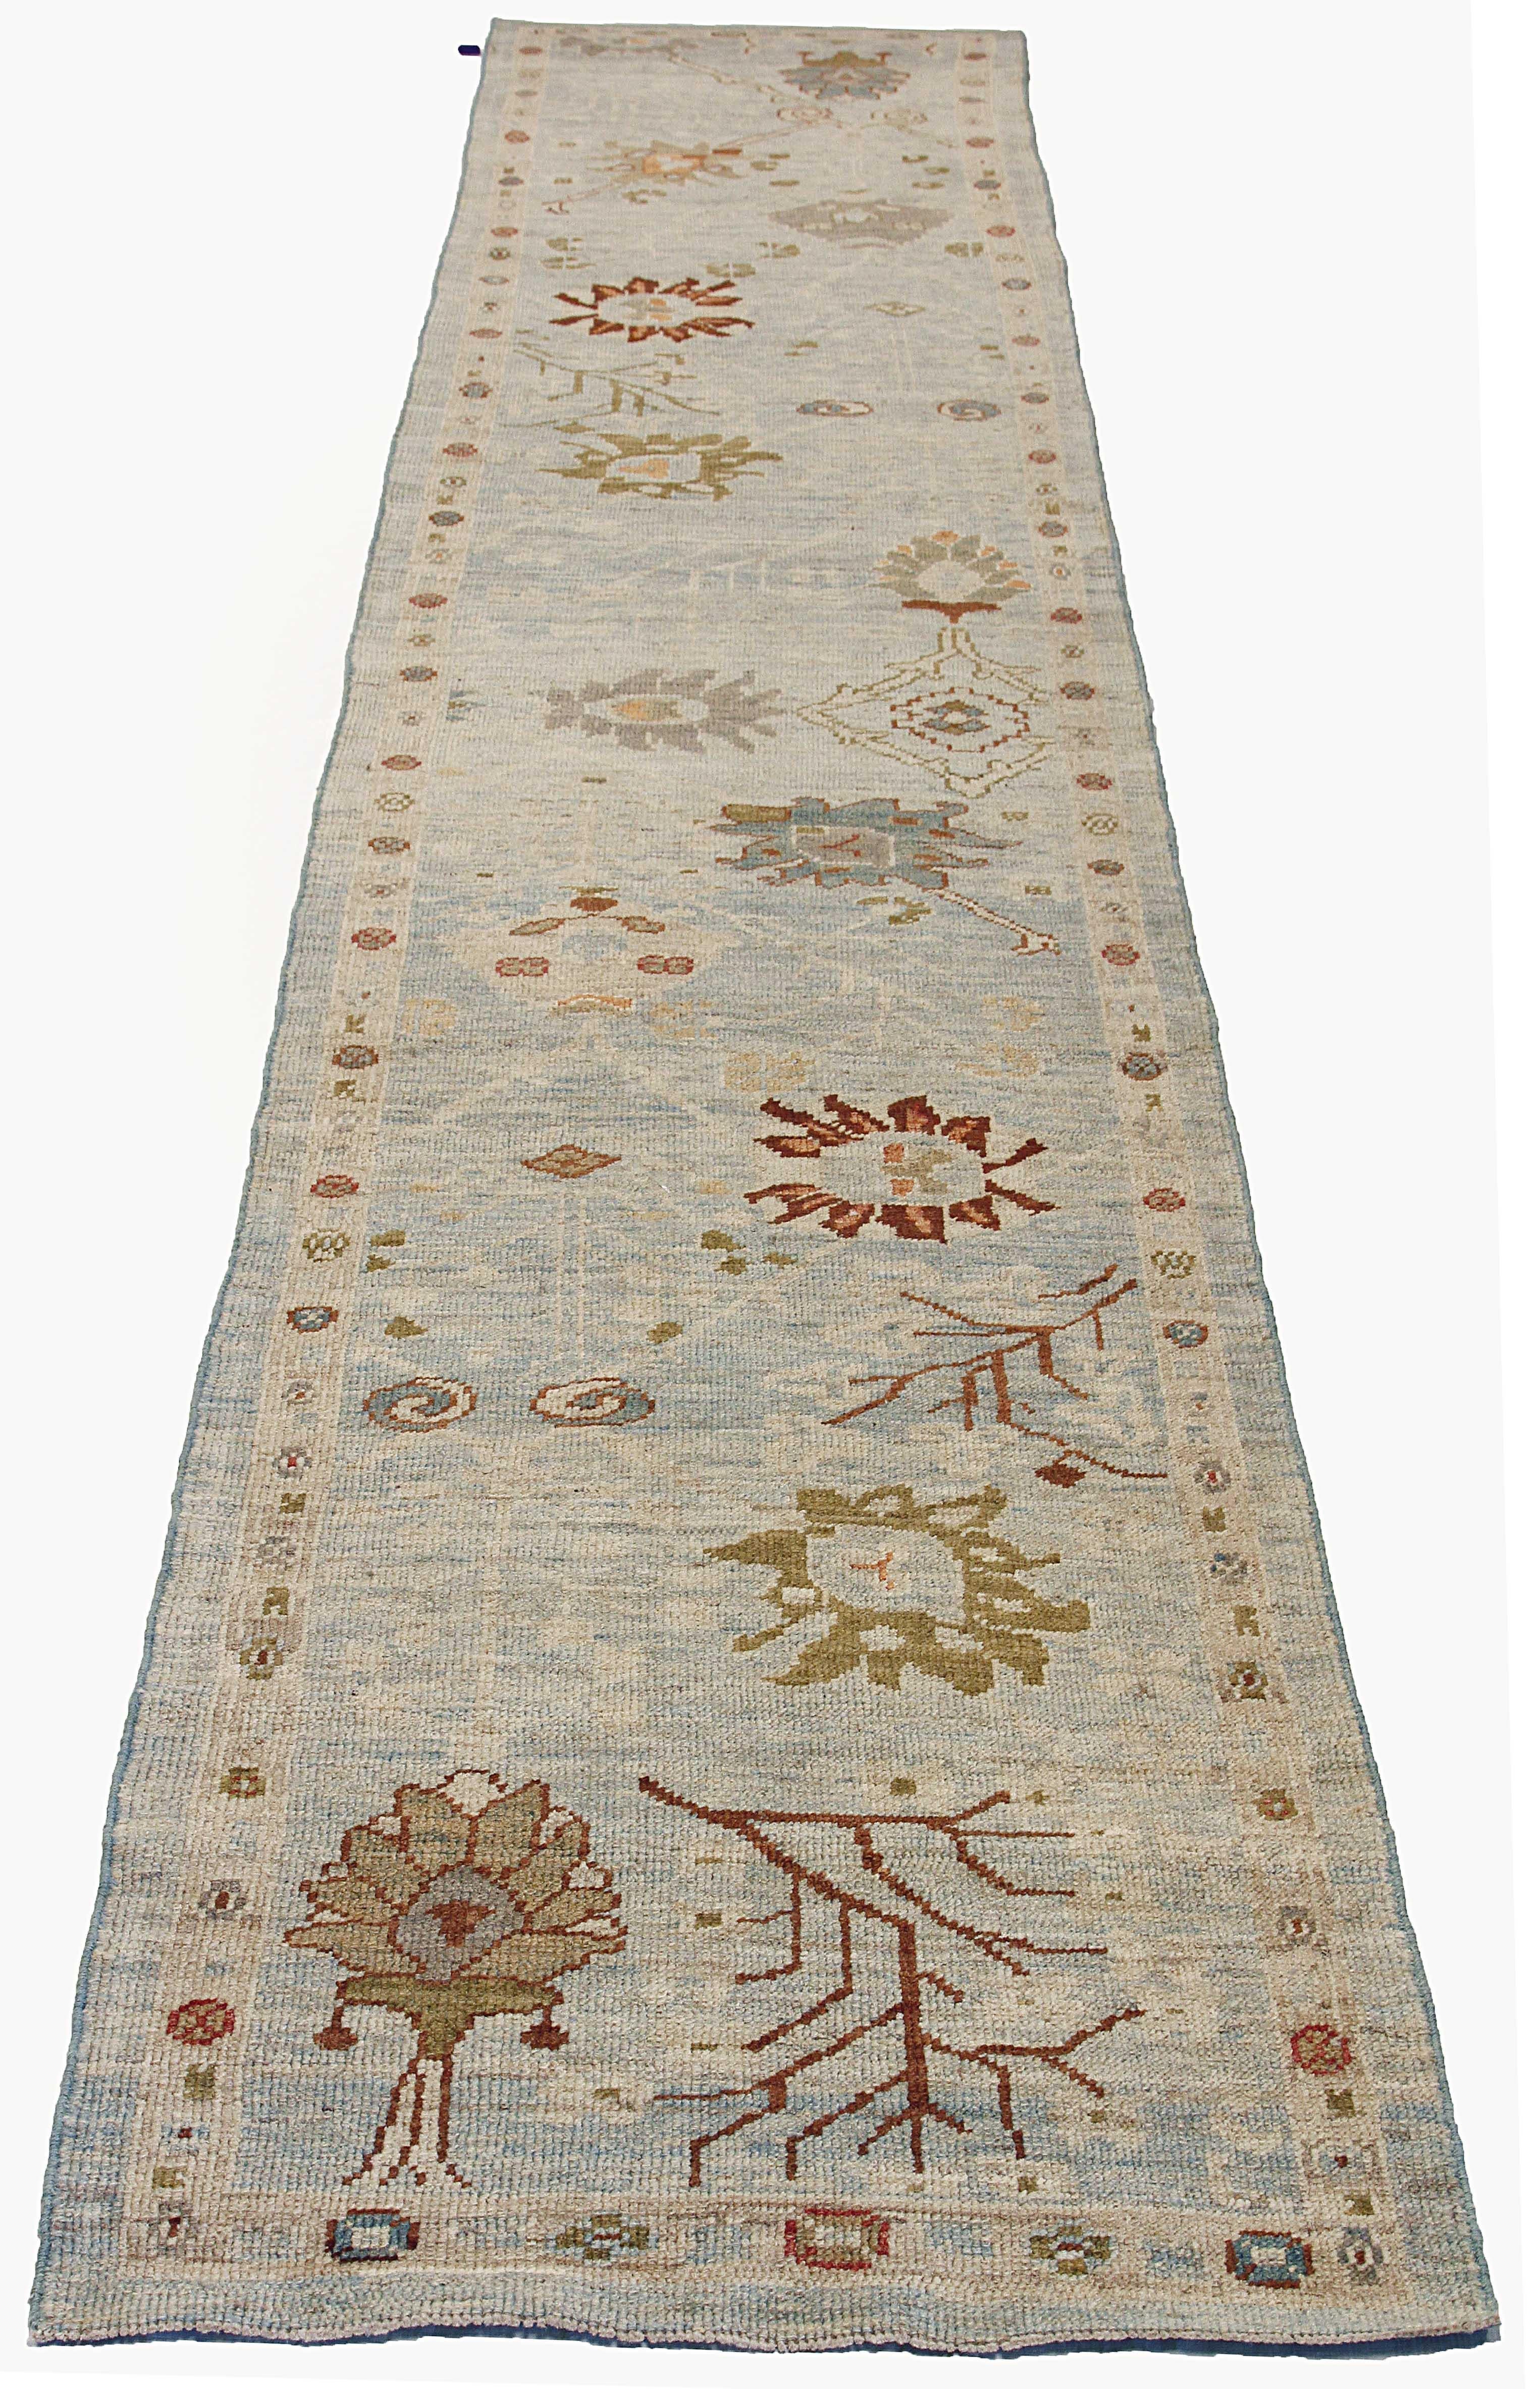 Contemporary Persian rug made of handwoven sheep’s wool of the finest quality. It’s colored with organic vegetable dyes that are certified safe for humans and pets alike. It features rows of flower medallion details all-over associated with Oushak